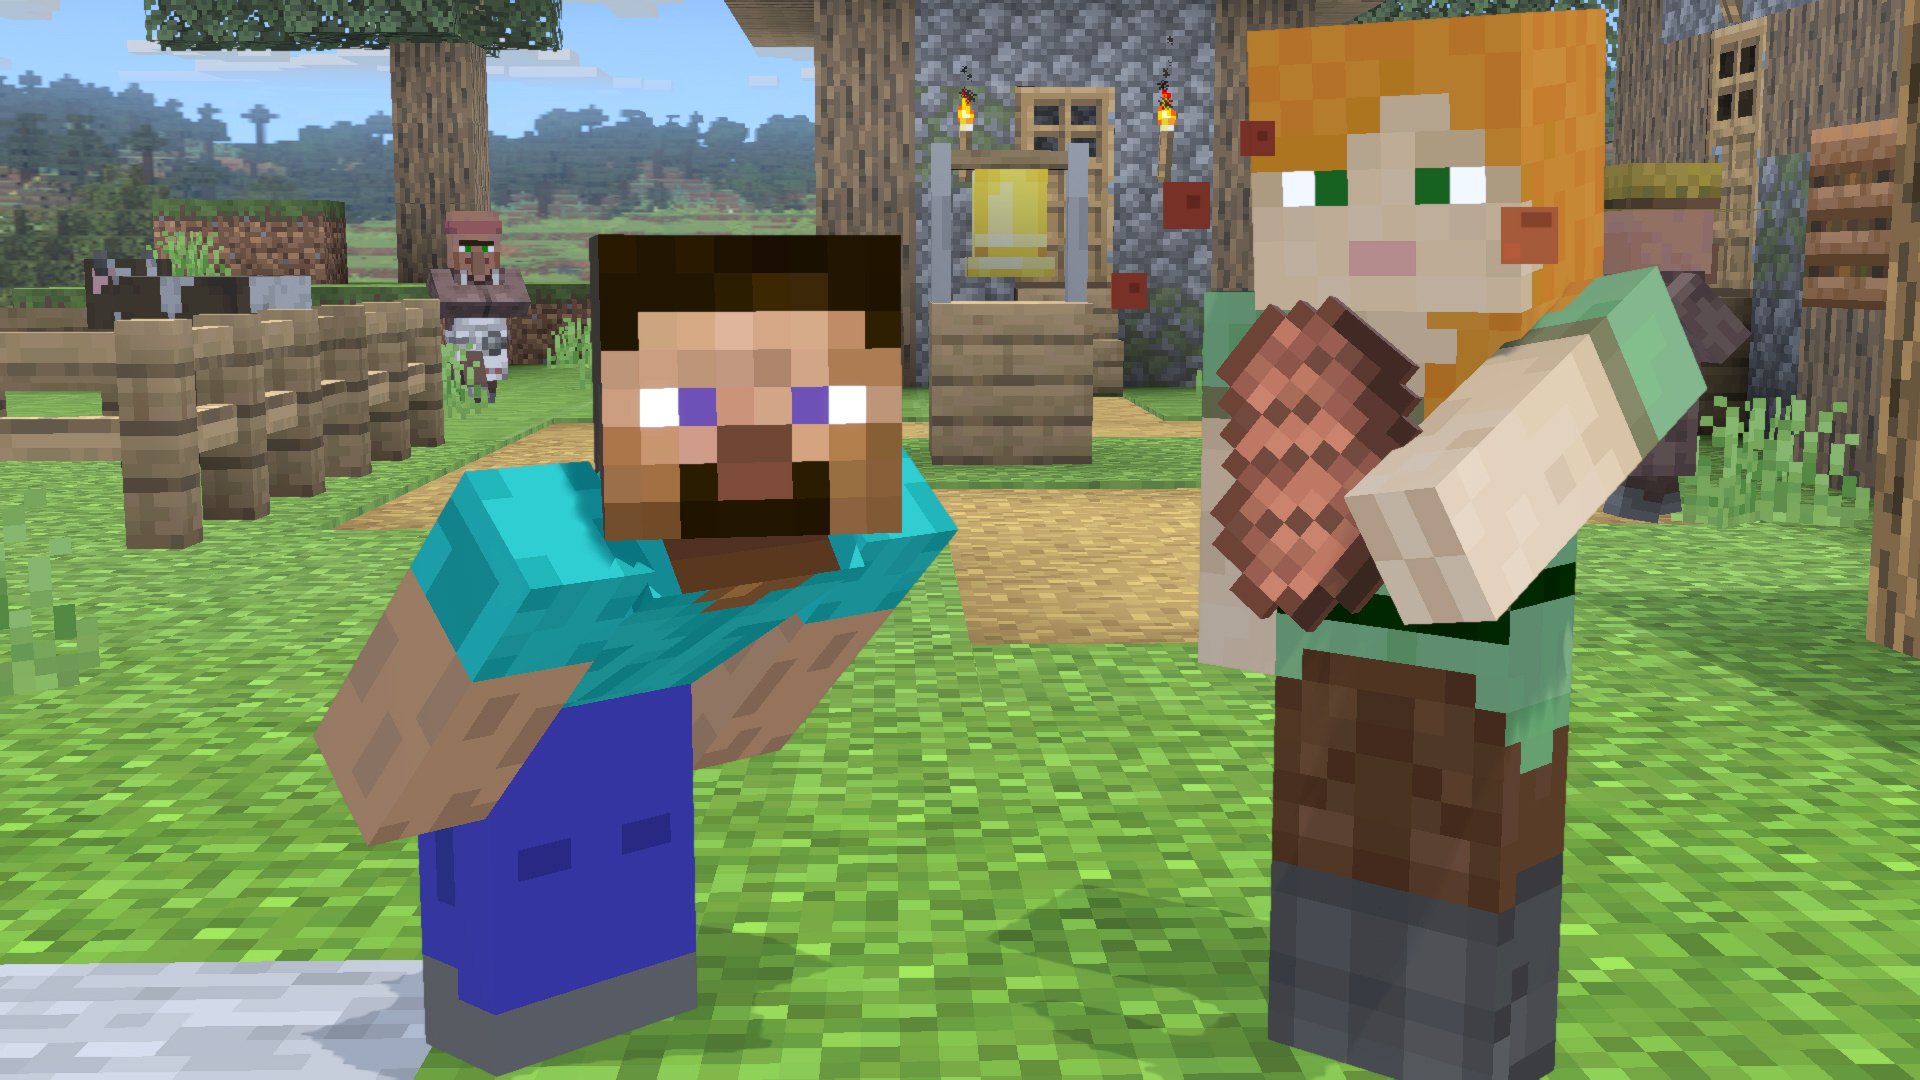 steve and alex from minecraft